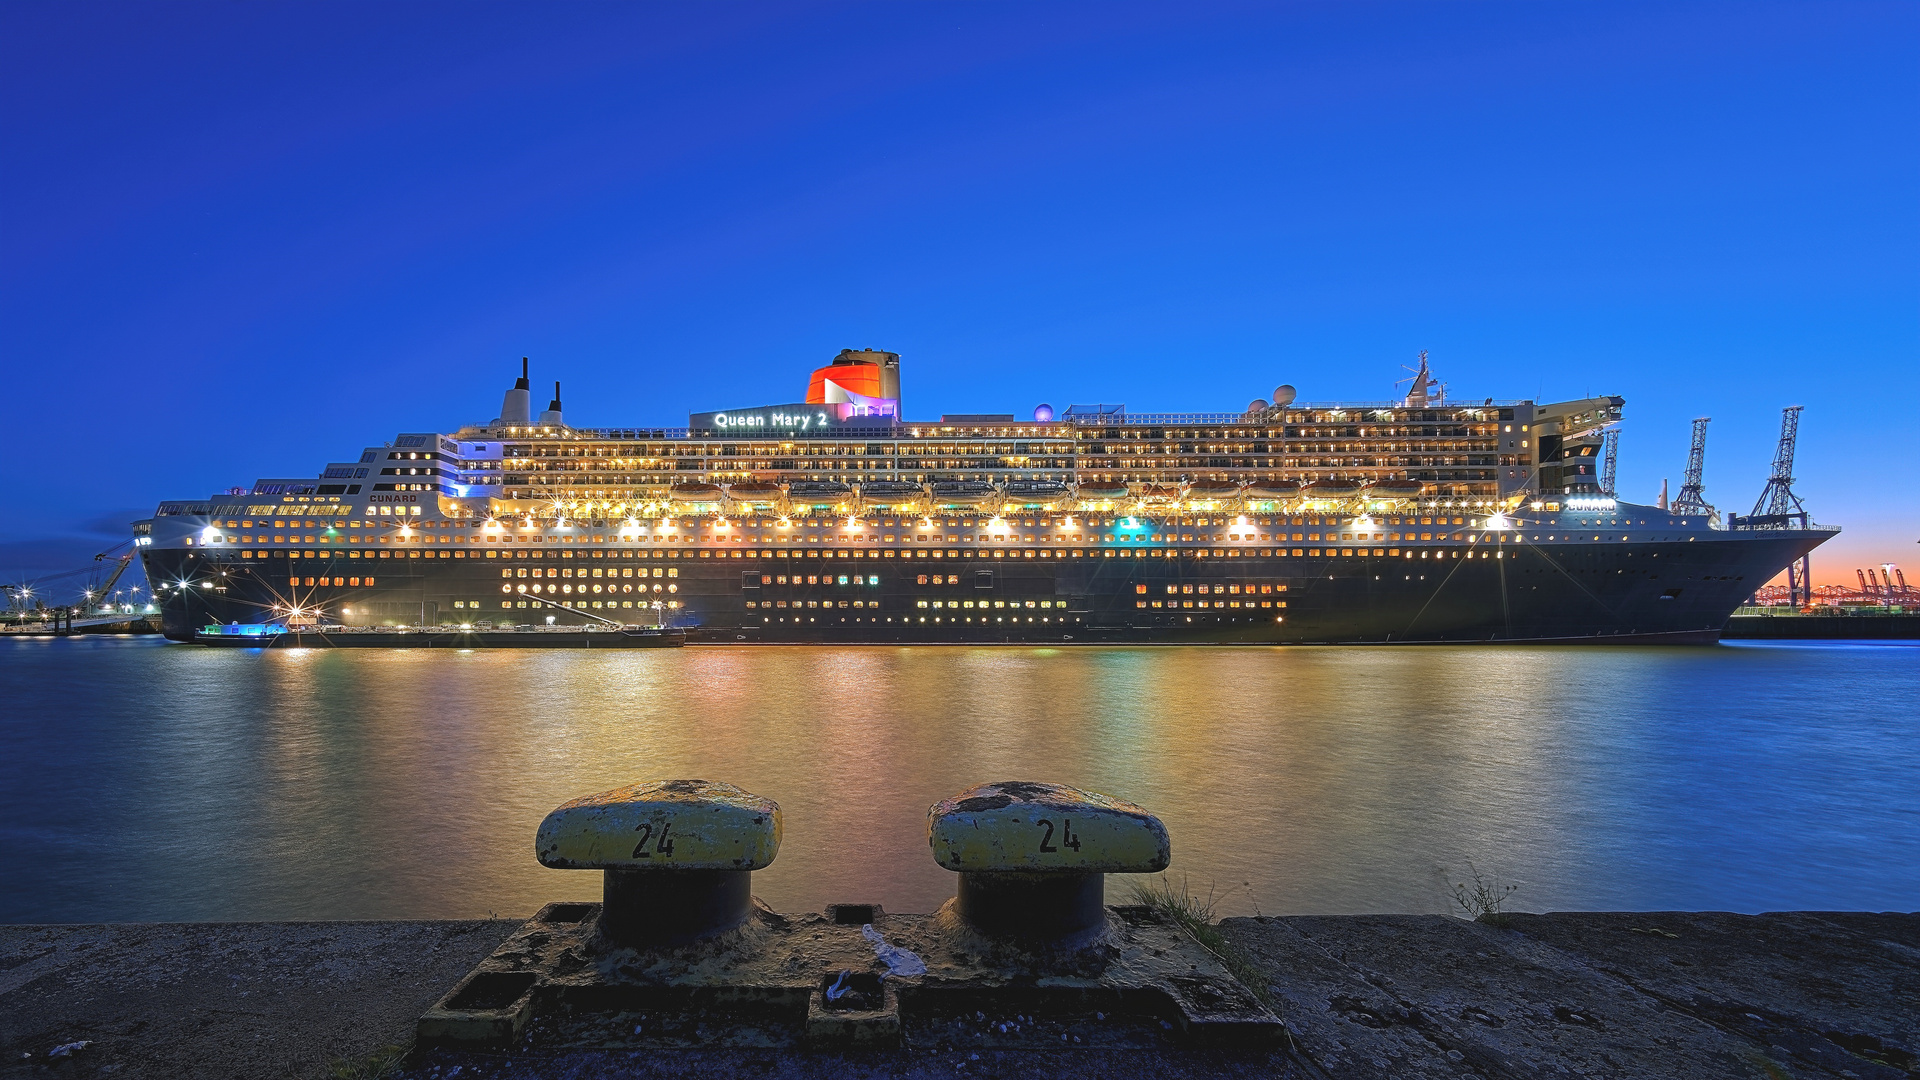 *Queen Mary 2*